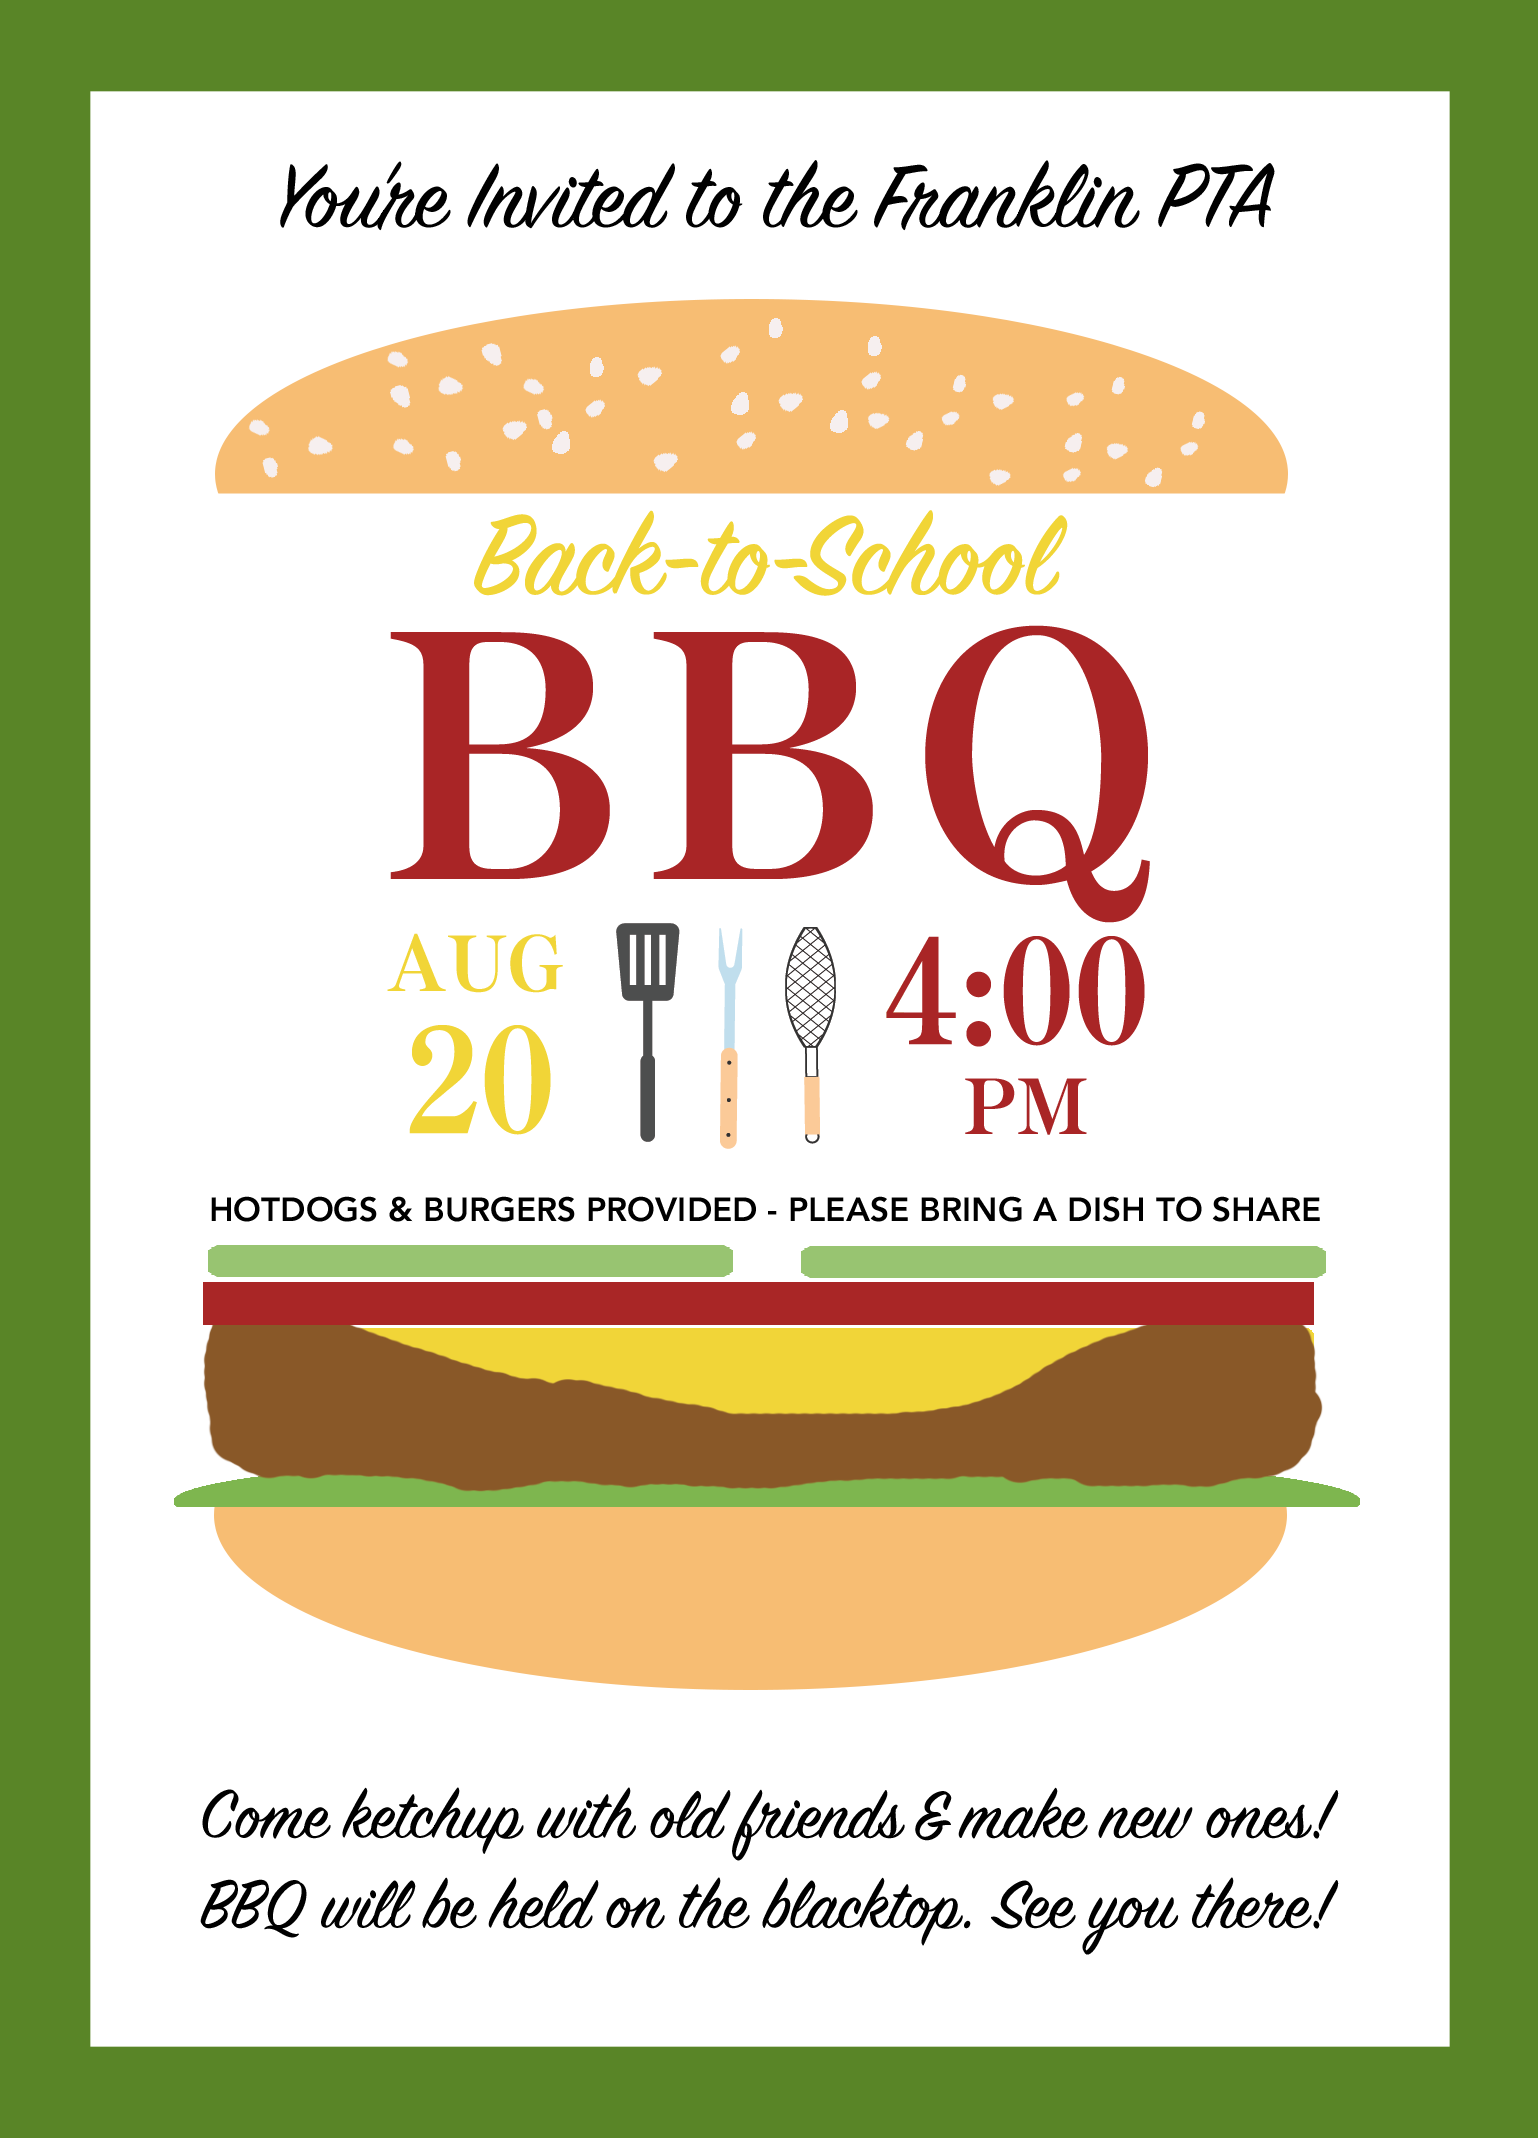 ELEVATE Back to School BBQ